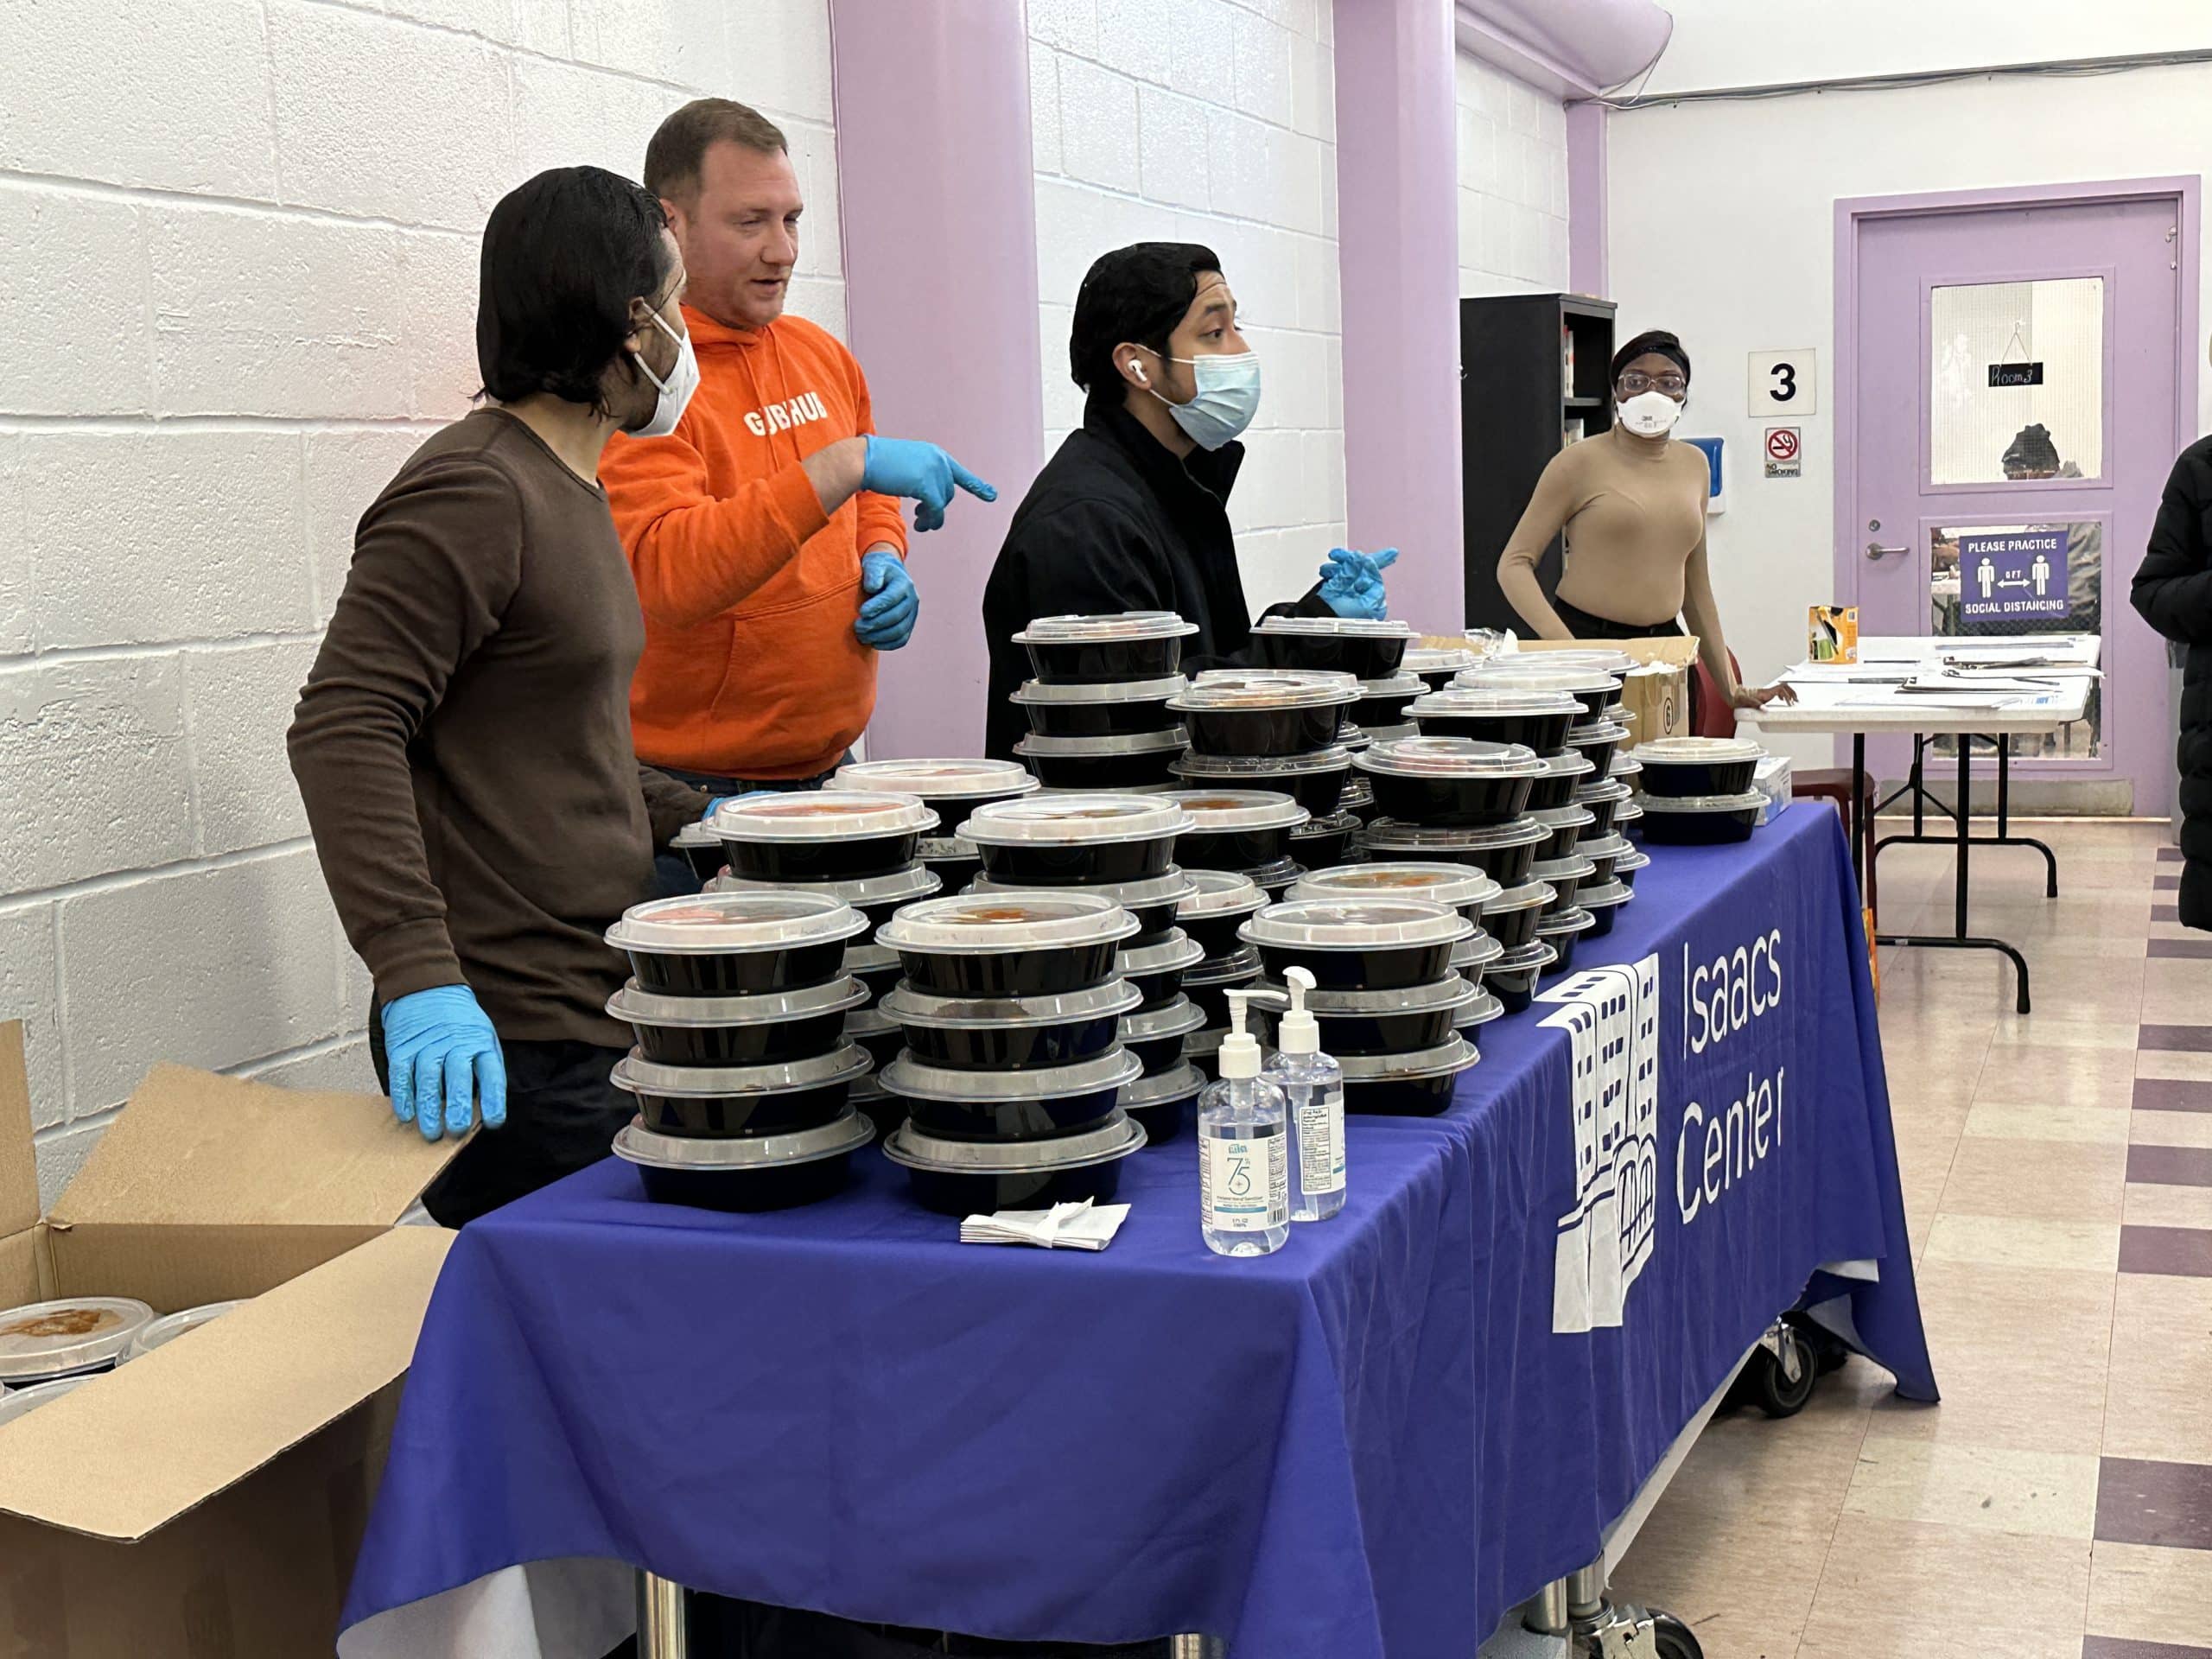 Brett Swanson from Grubhub (in orange) spent roughly 15 mins stacking meals instead of handing them out directly to the hungry UES seniors | Upper East Site